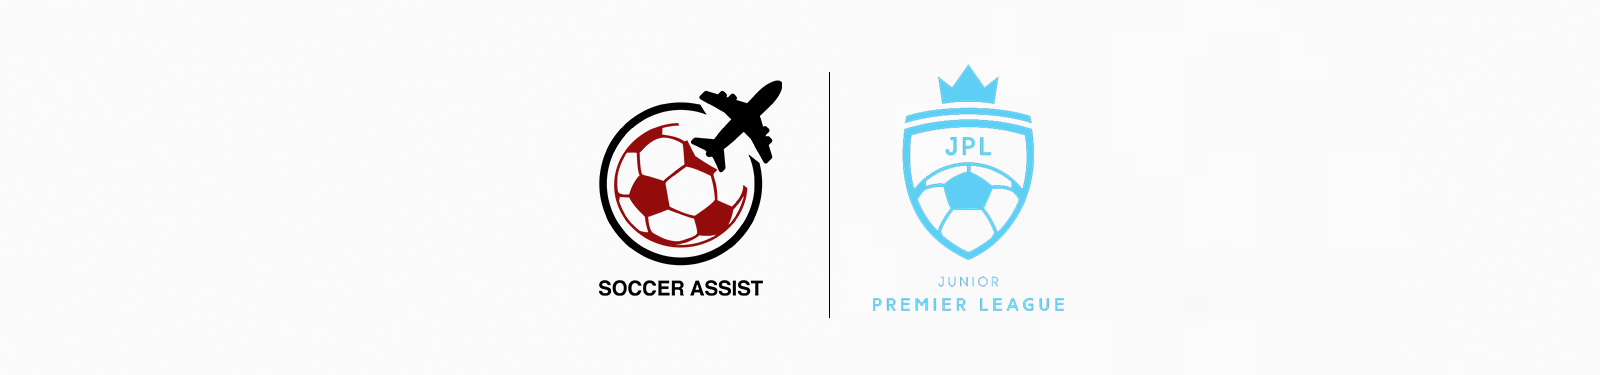 Soccer Assist Partners With The JPL